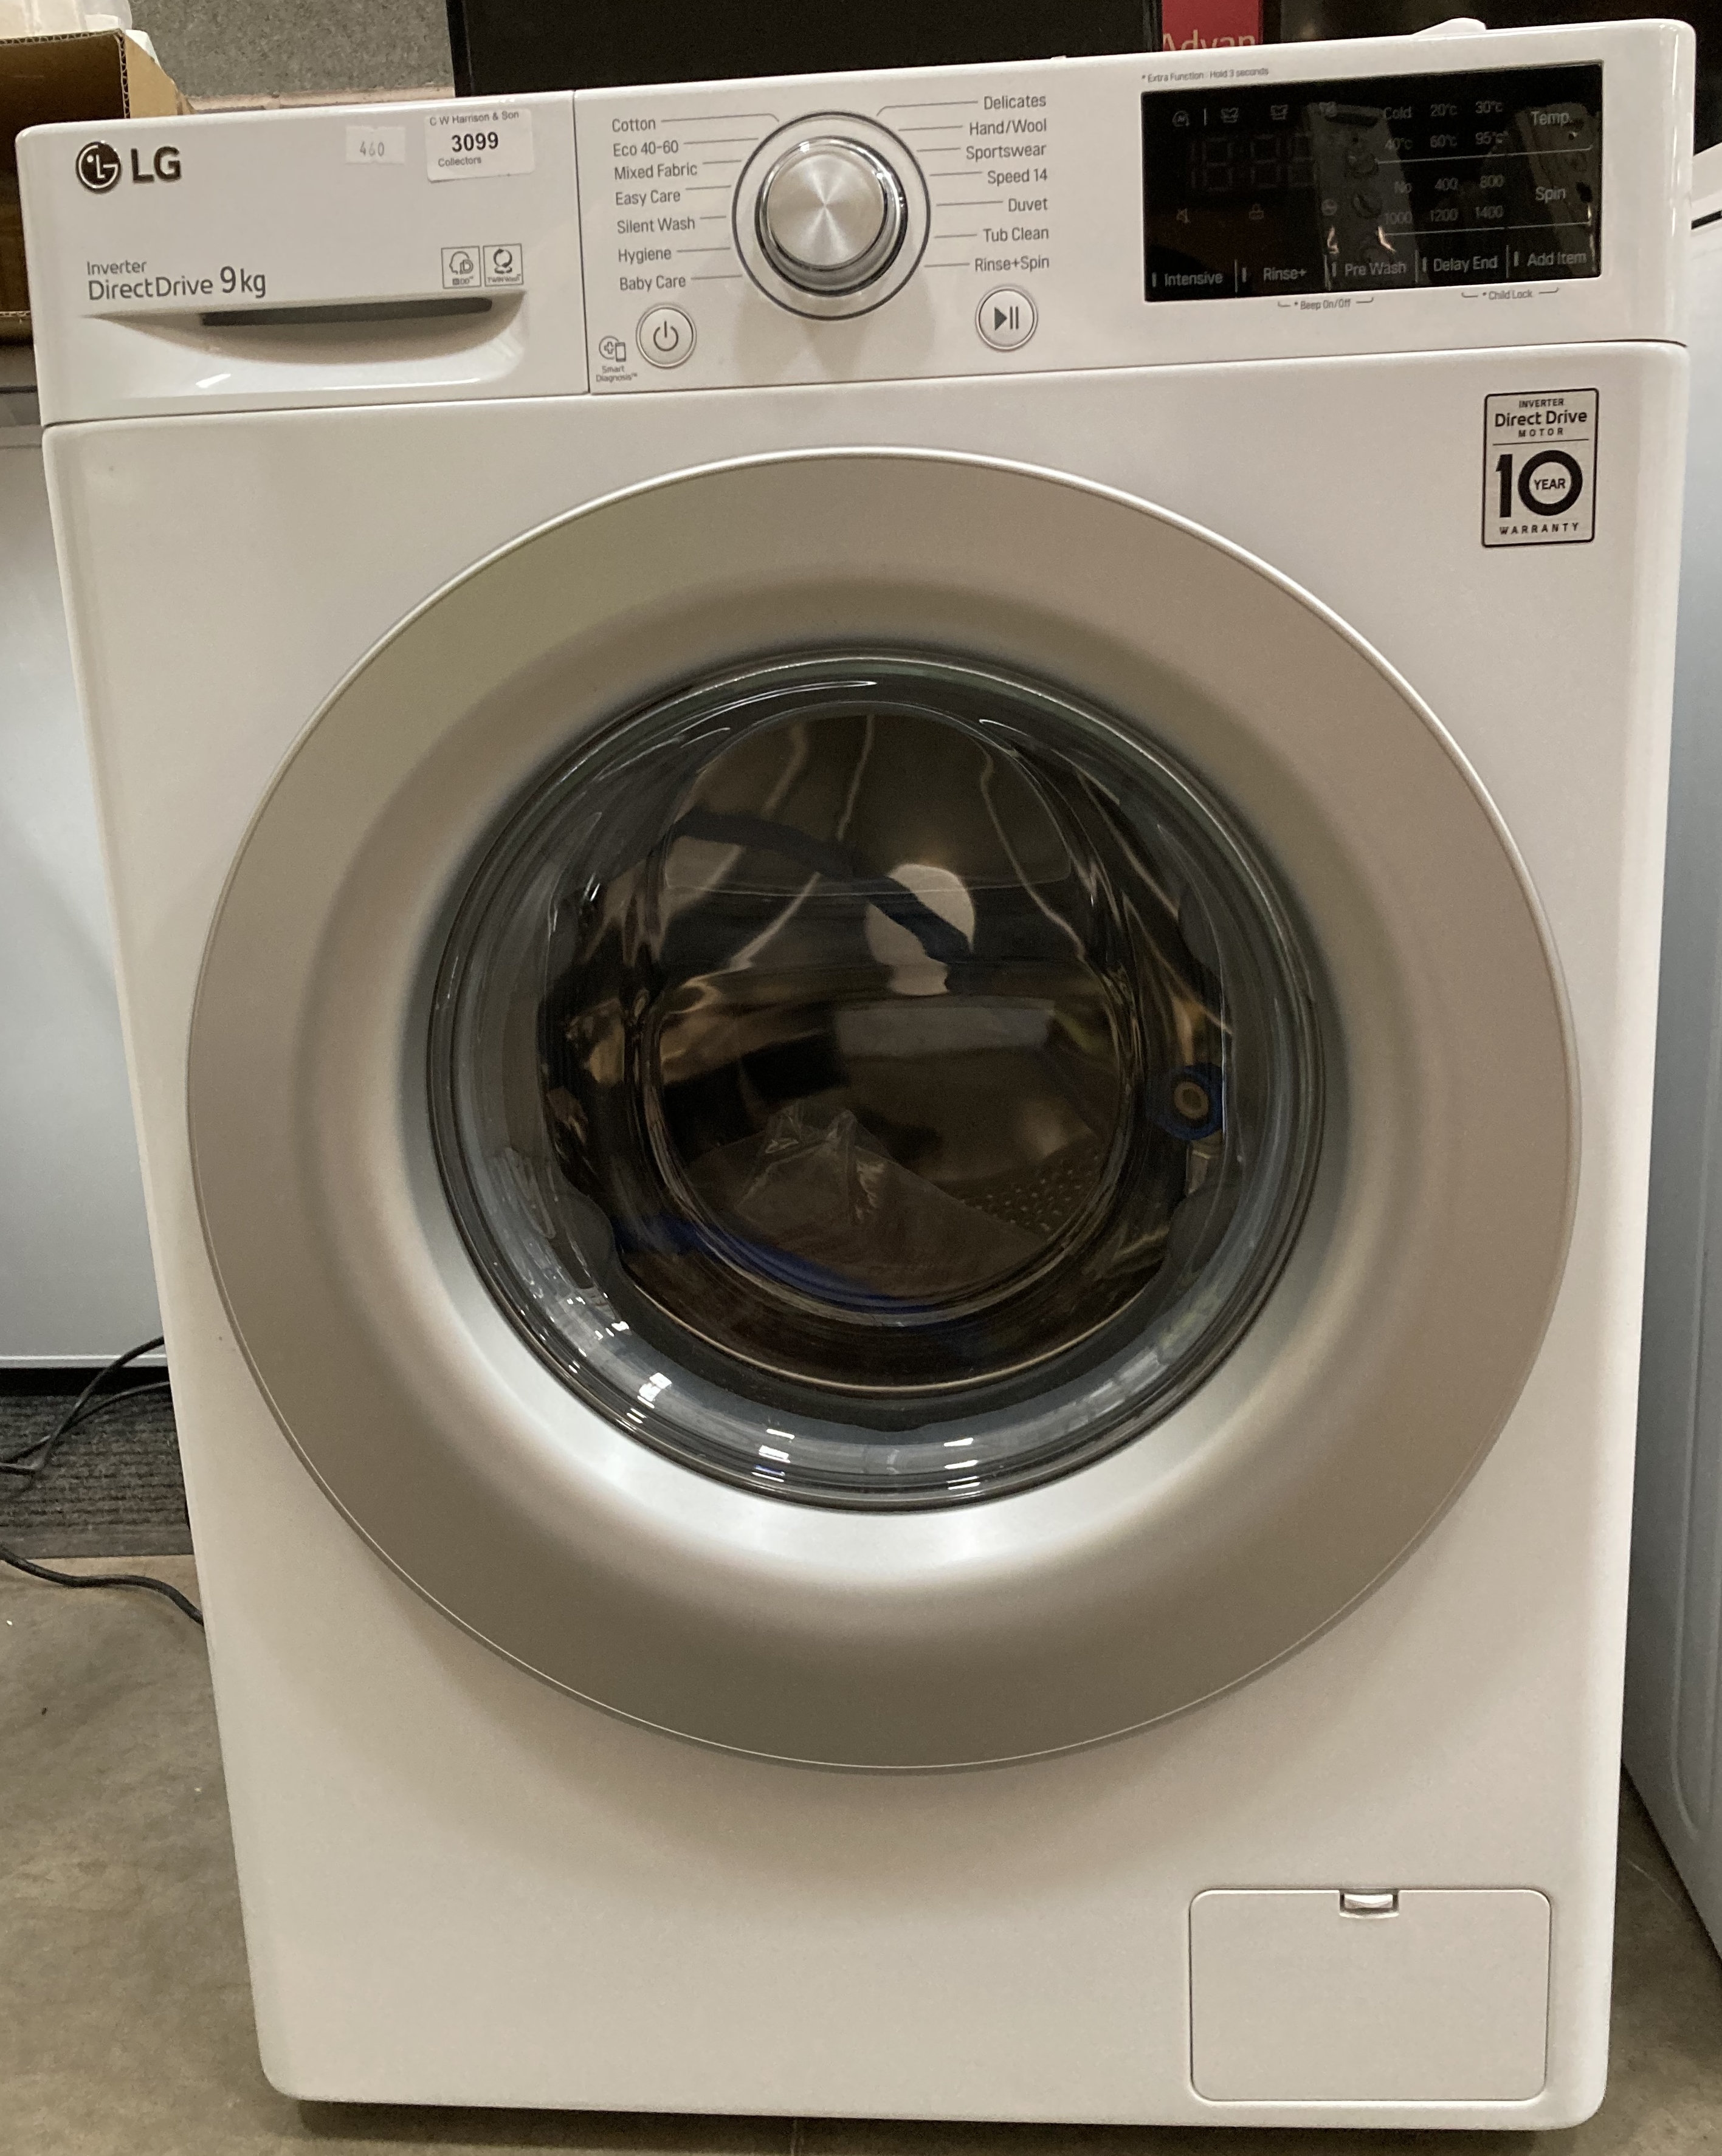 An LG Inverter Direct Drive 9kg automatic washing machine complete with manual advised bought new - Image 3 of 3